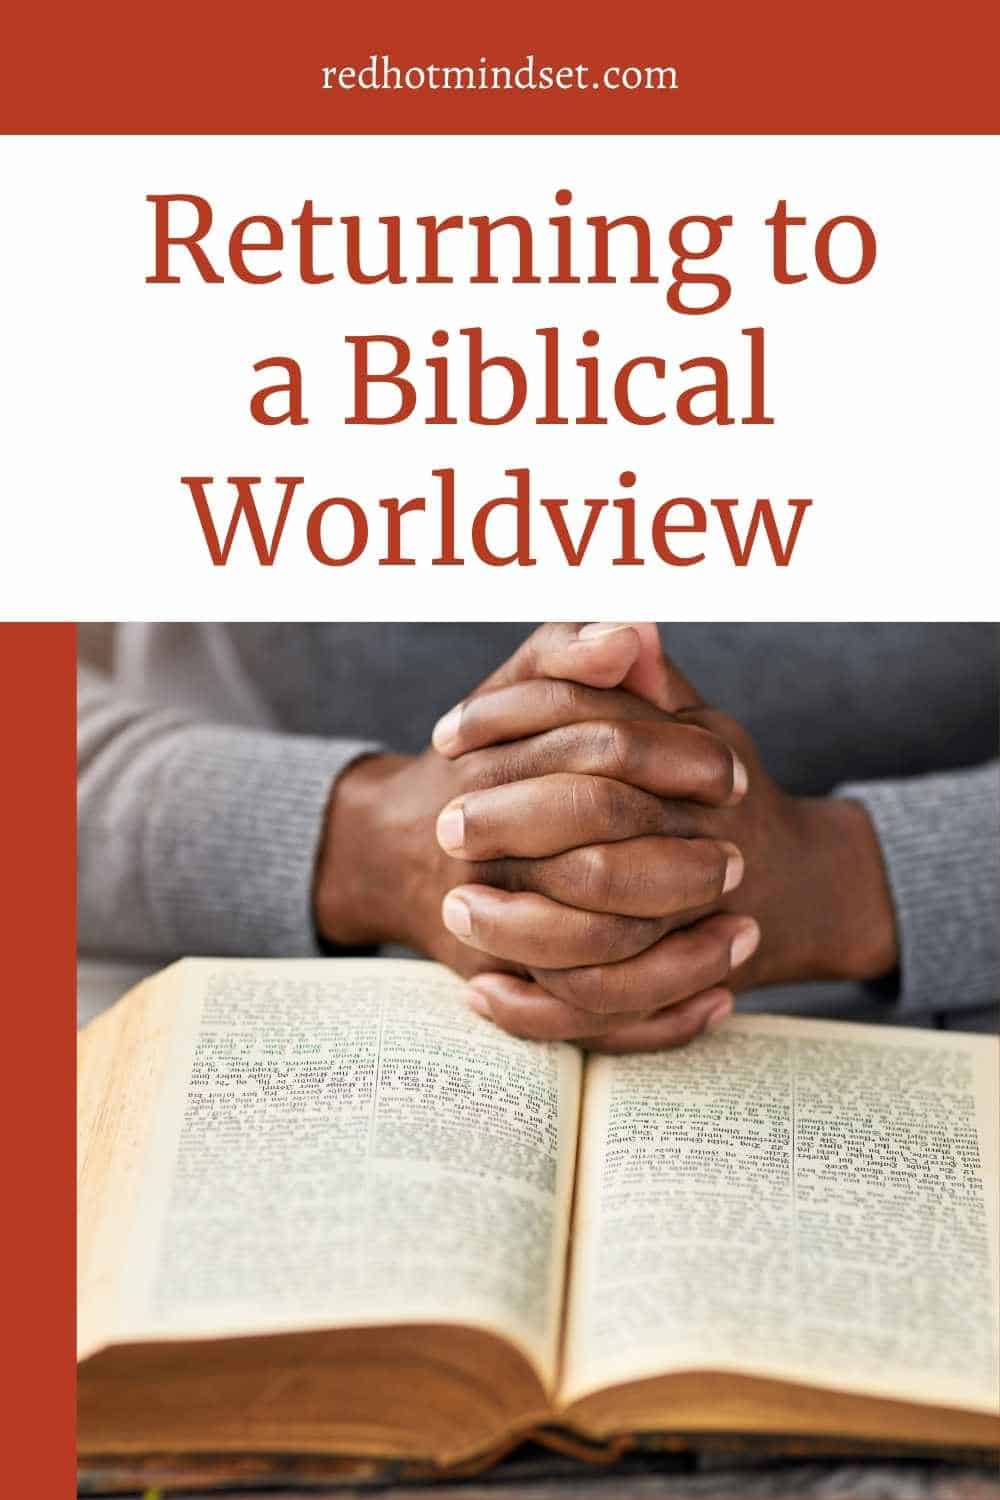 Returning to a Biblical Worldview and Getting Back into the Word of God